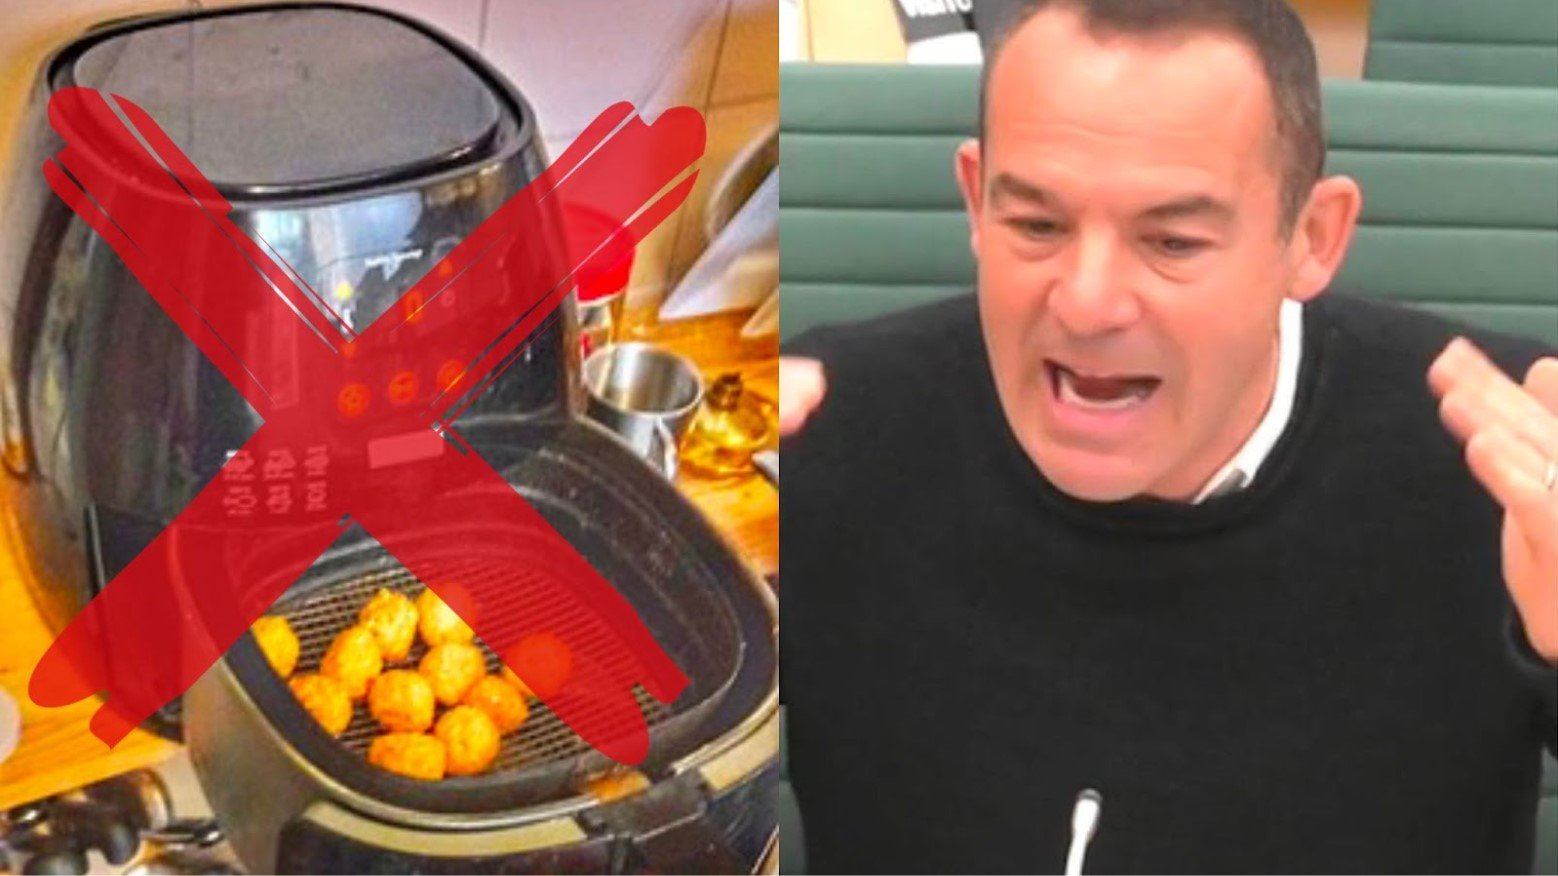 Martin Lewis (shown right) seems to yell next to a photo of an air fryer with tater tots in it (left). The air fryer has a red X on top of it.